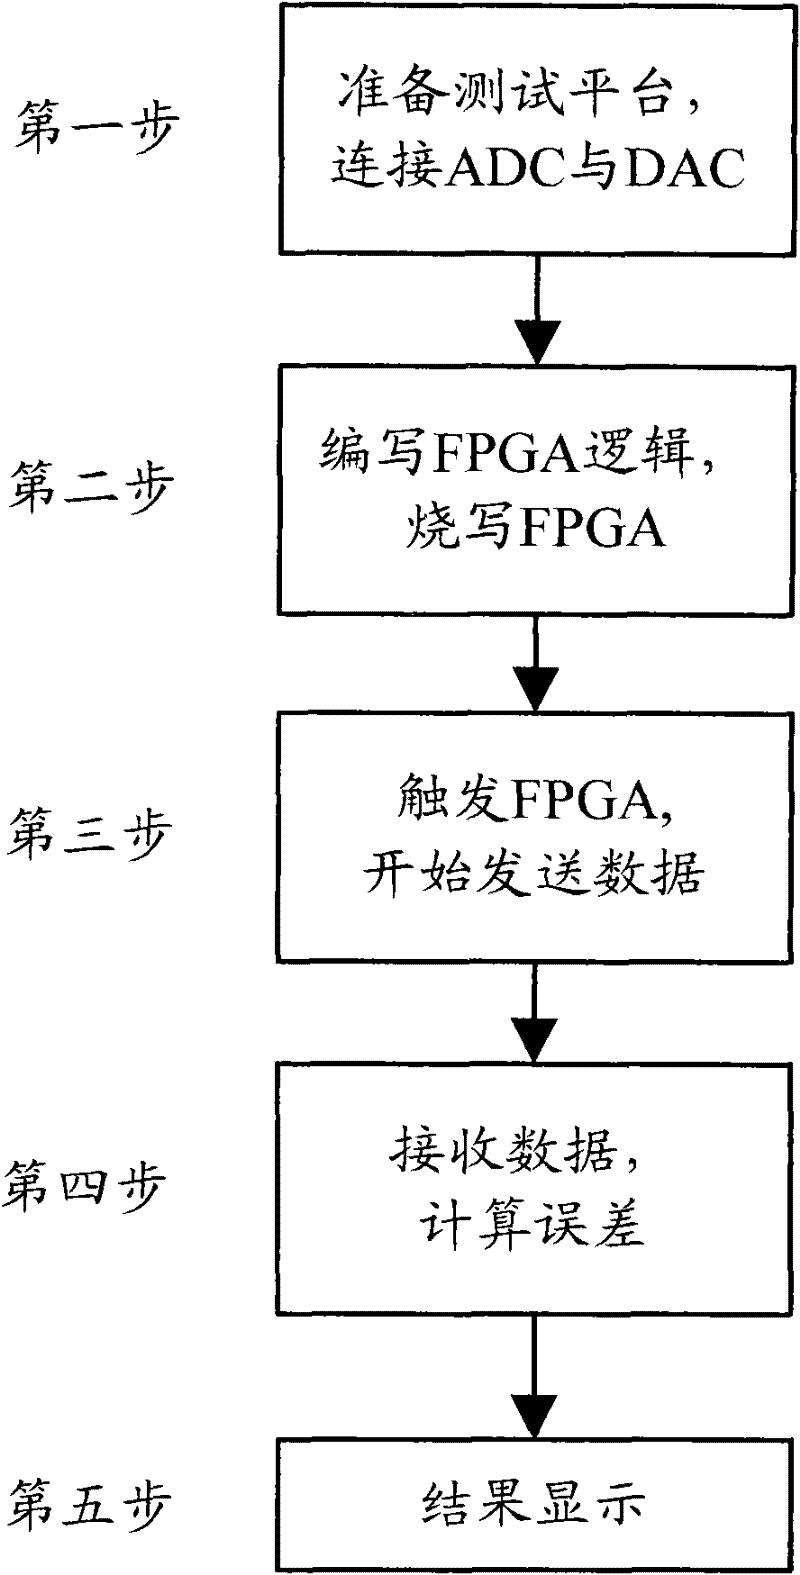 Circuit structure and method for automatically testing analog baseband chip comprising analog-digital converter (ADC) and digital-analog converter (DAC)